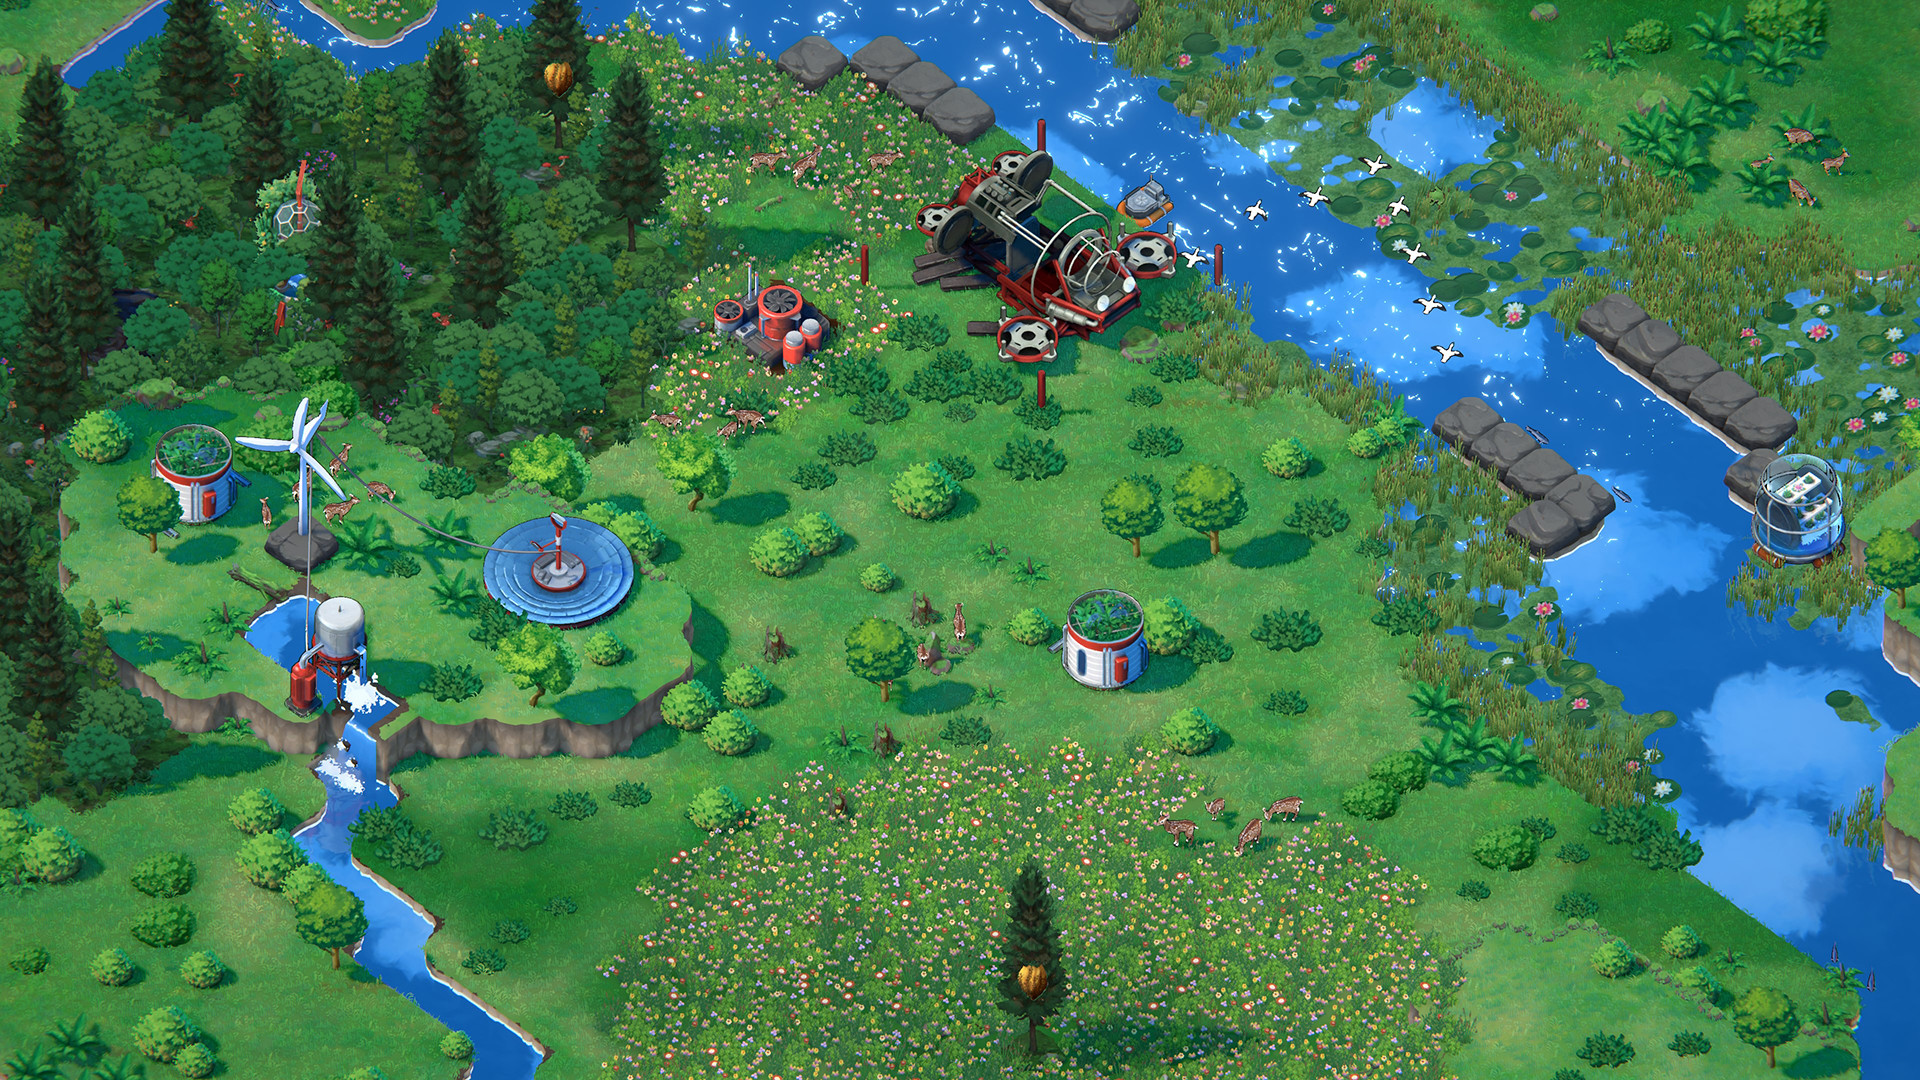 Terra Nil is a “reverse city builder” where you restore an ecosystem